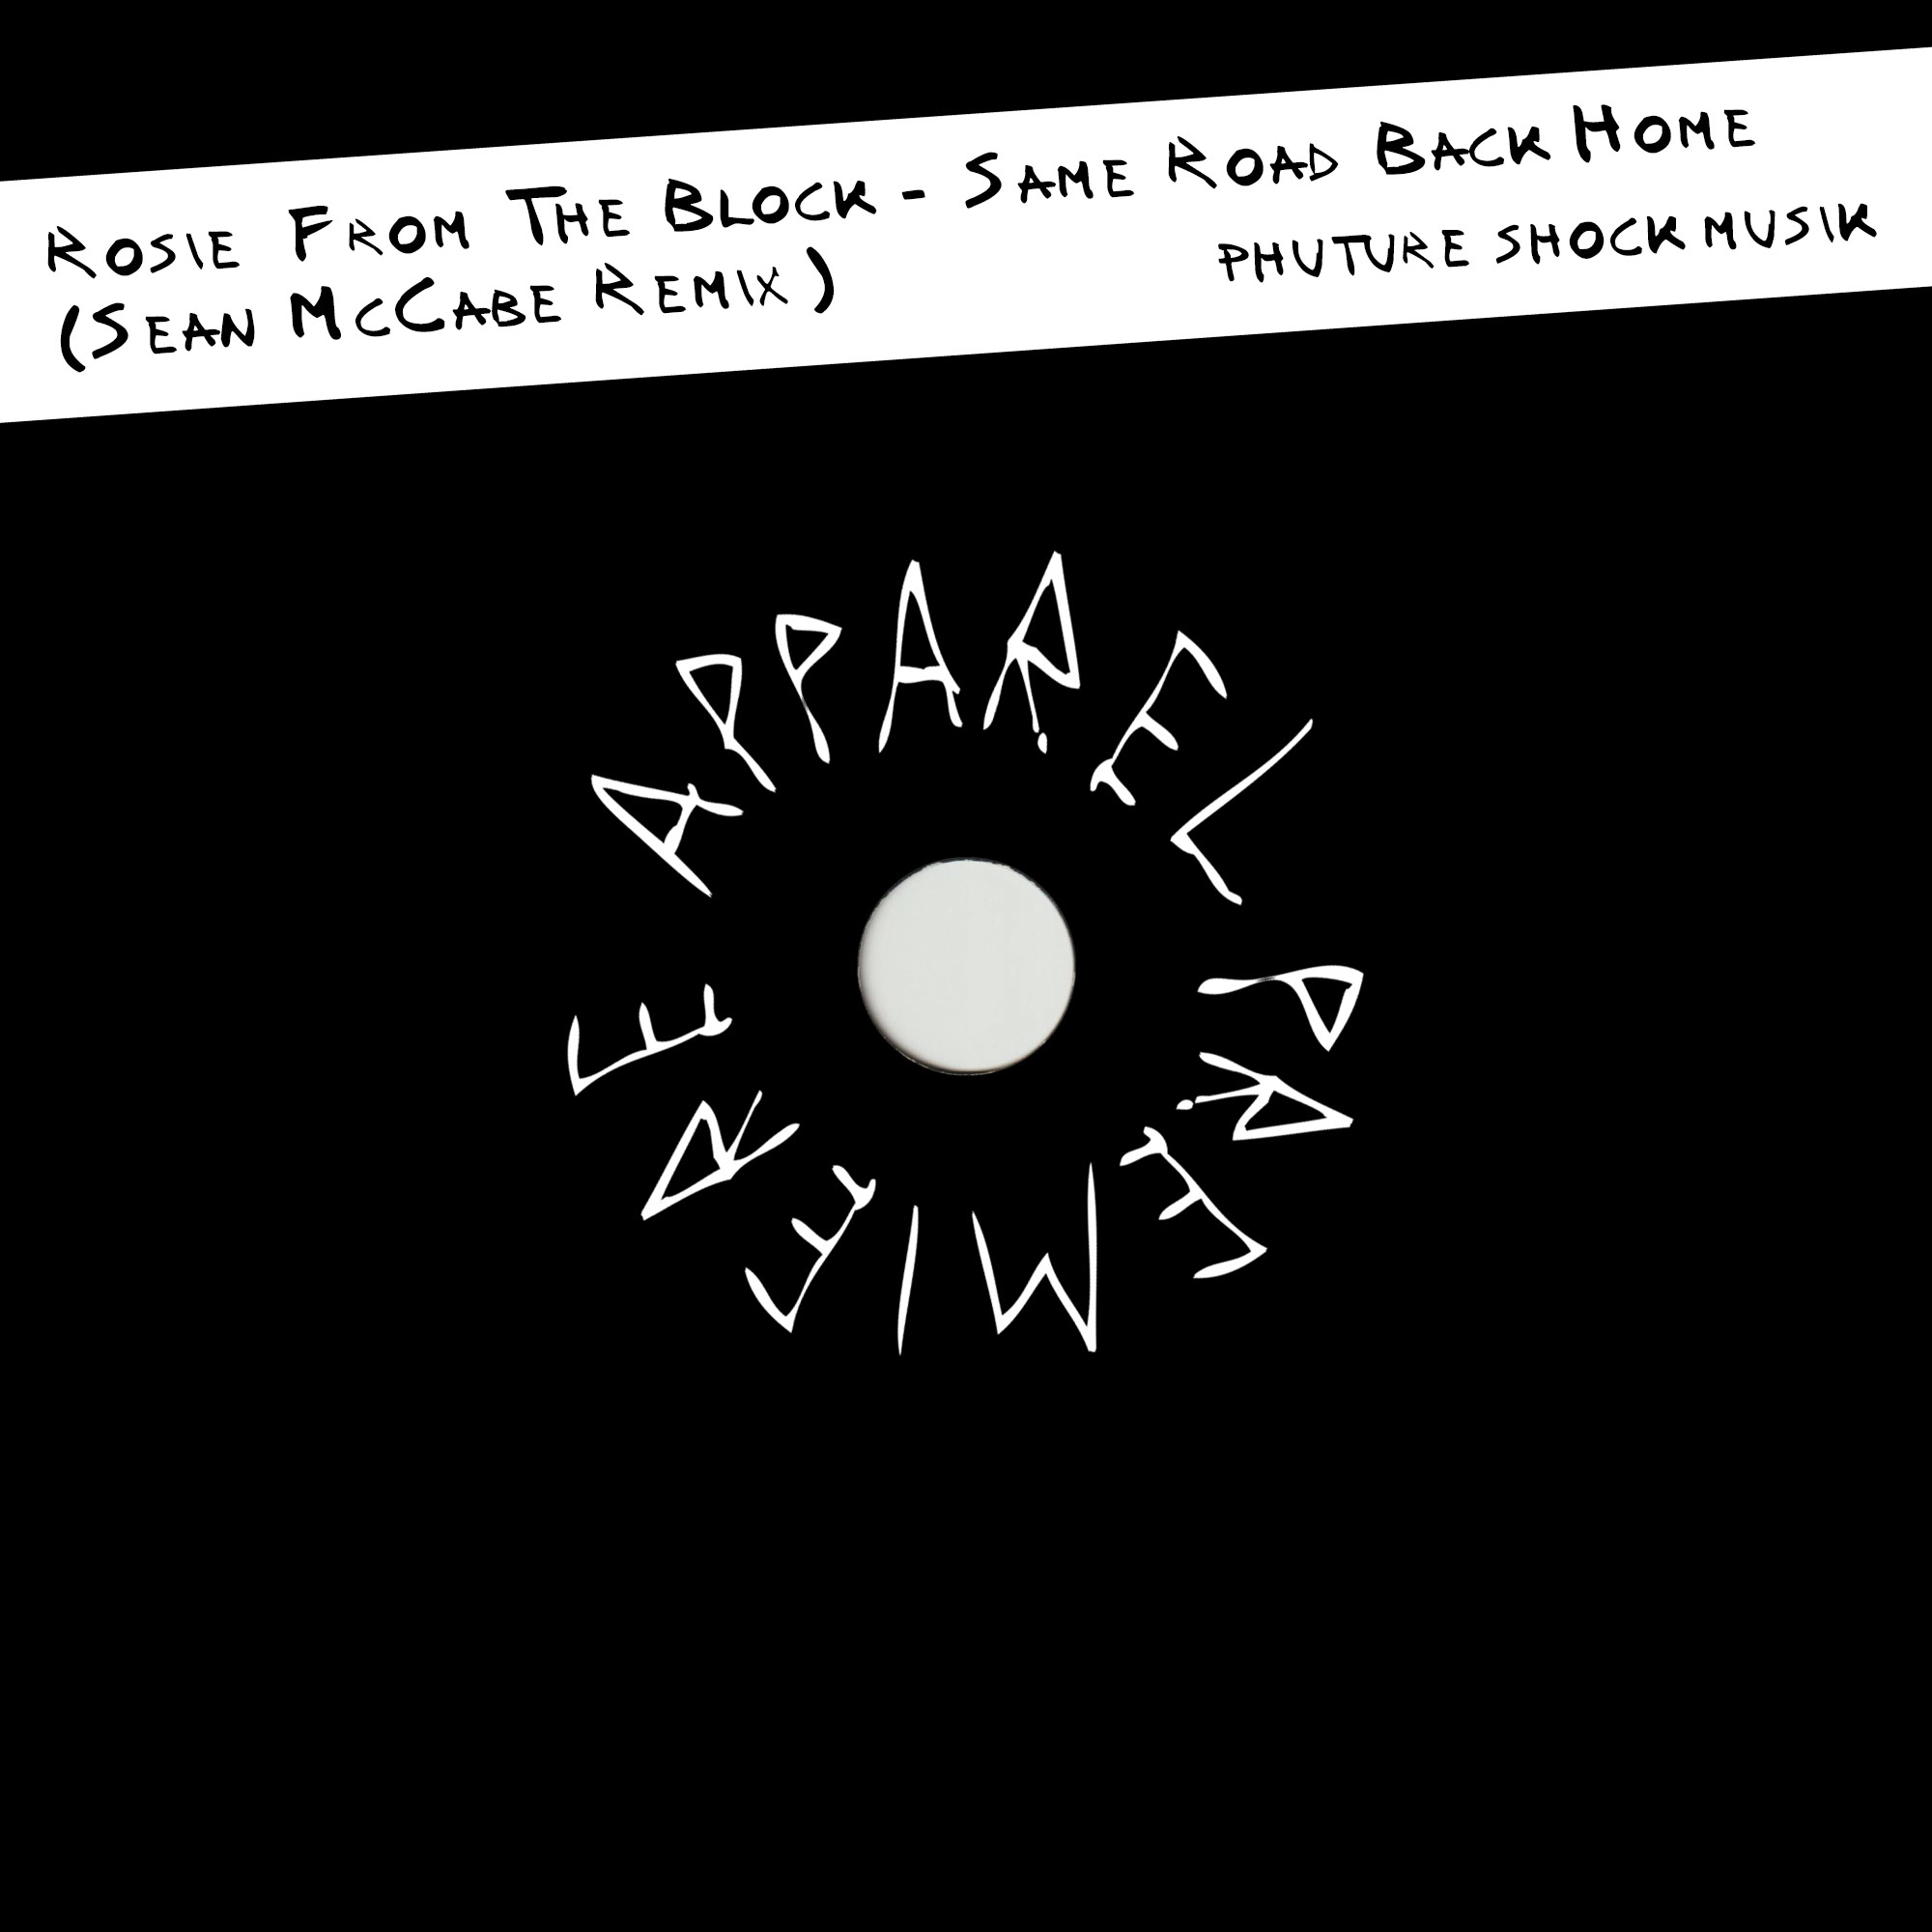 APPAREL PREMIERE Rosie From The Block – Same Road Back Home (Sean McCabe Remix) [Phuture Shock Musik]